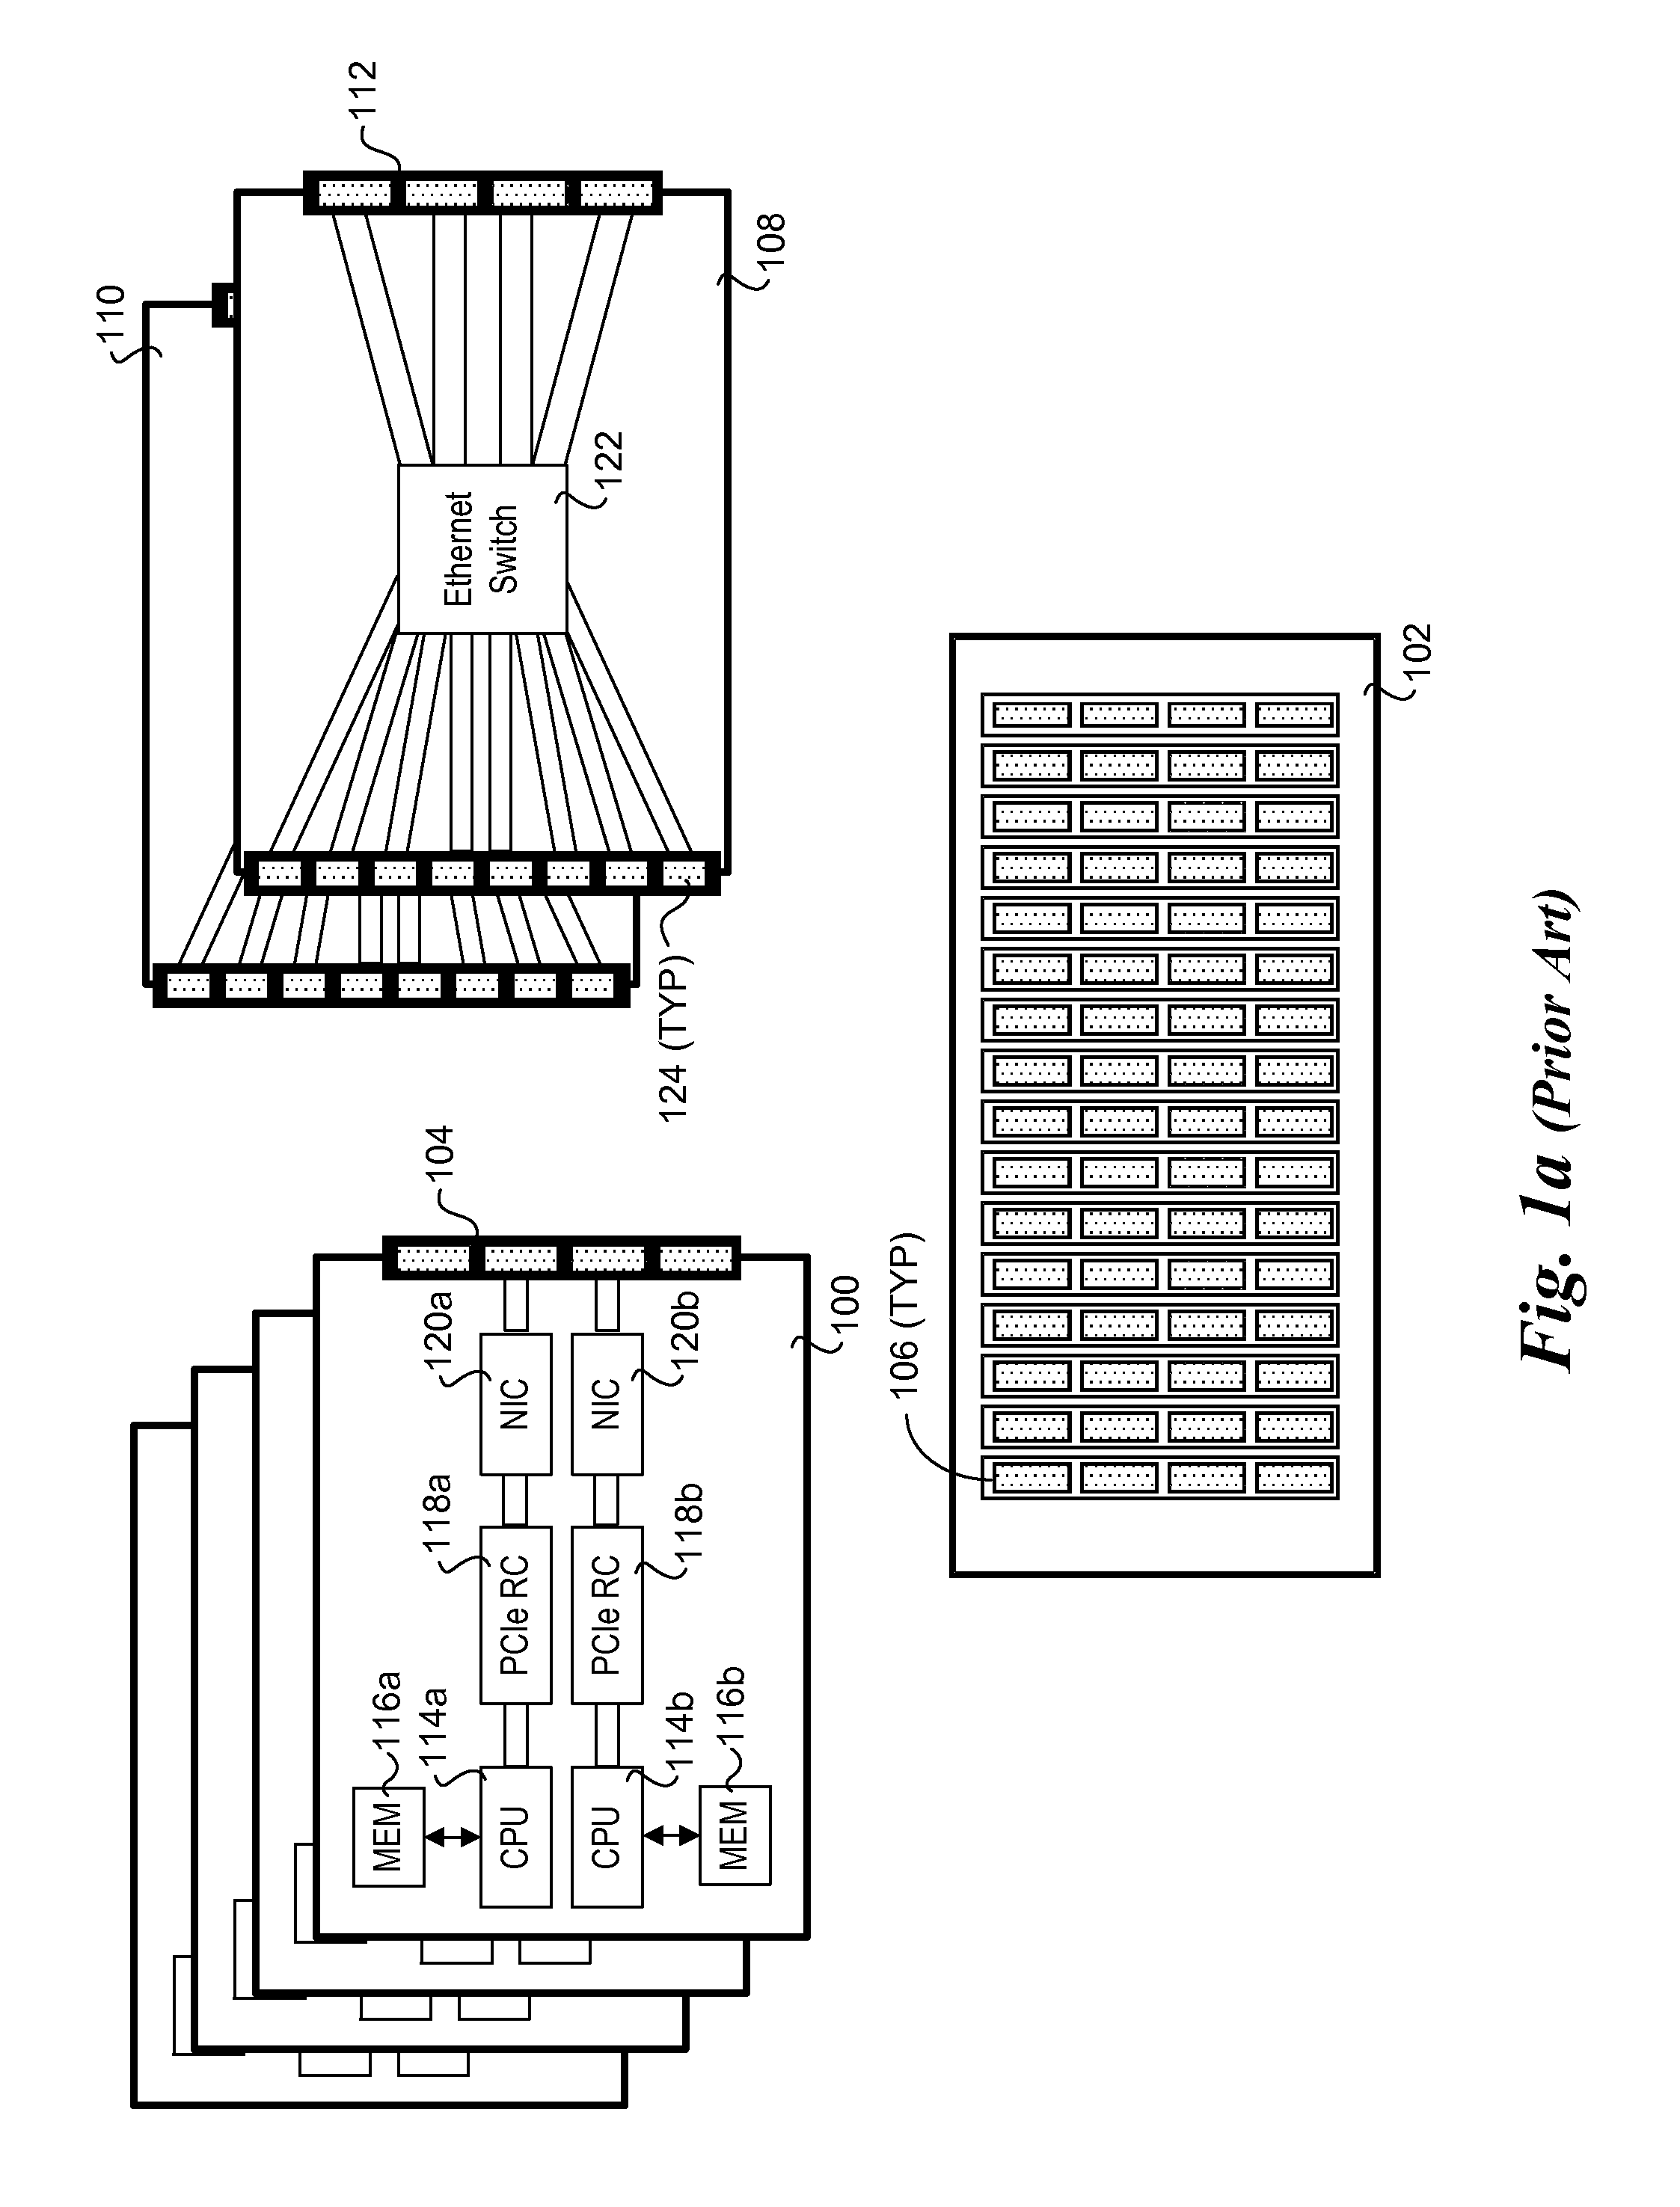 Methods and apparatus for sharing a network interface controller